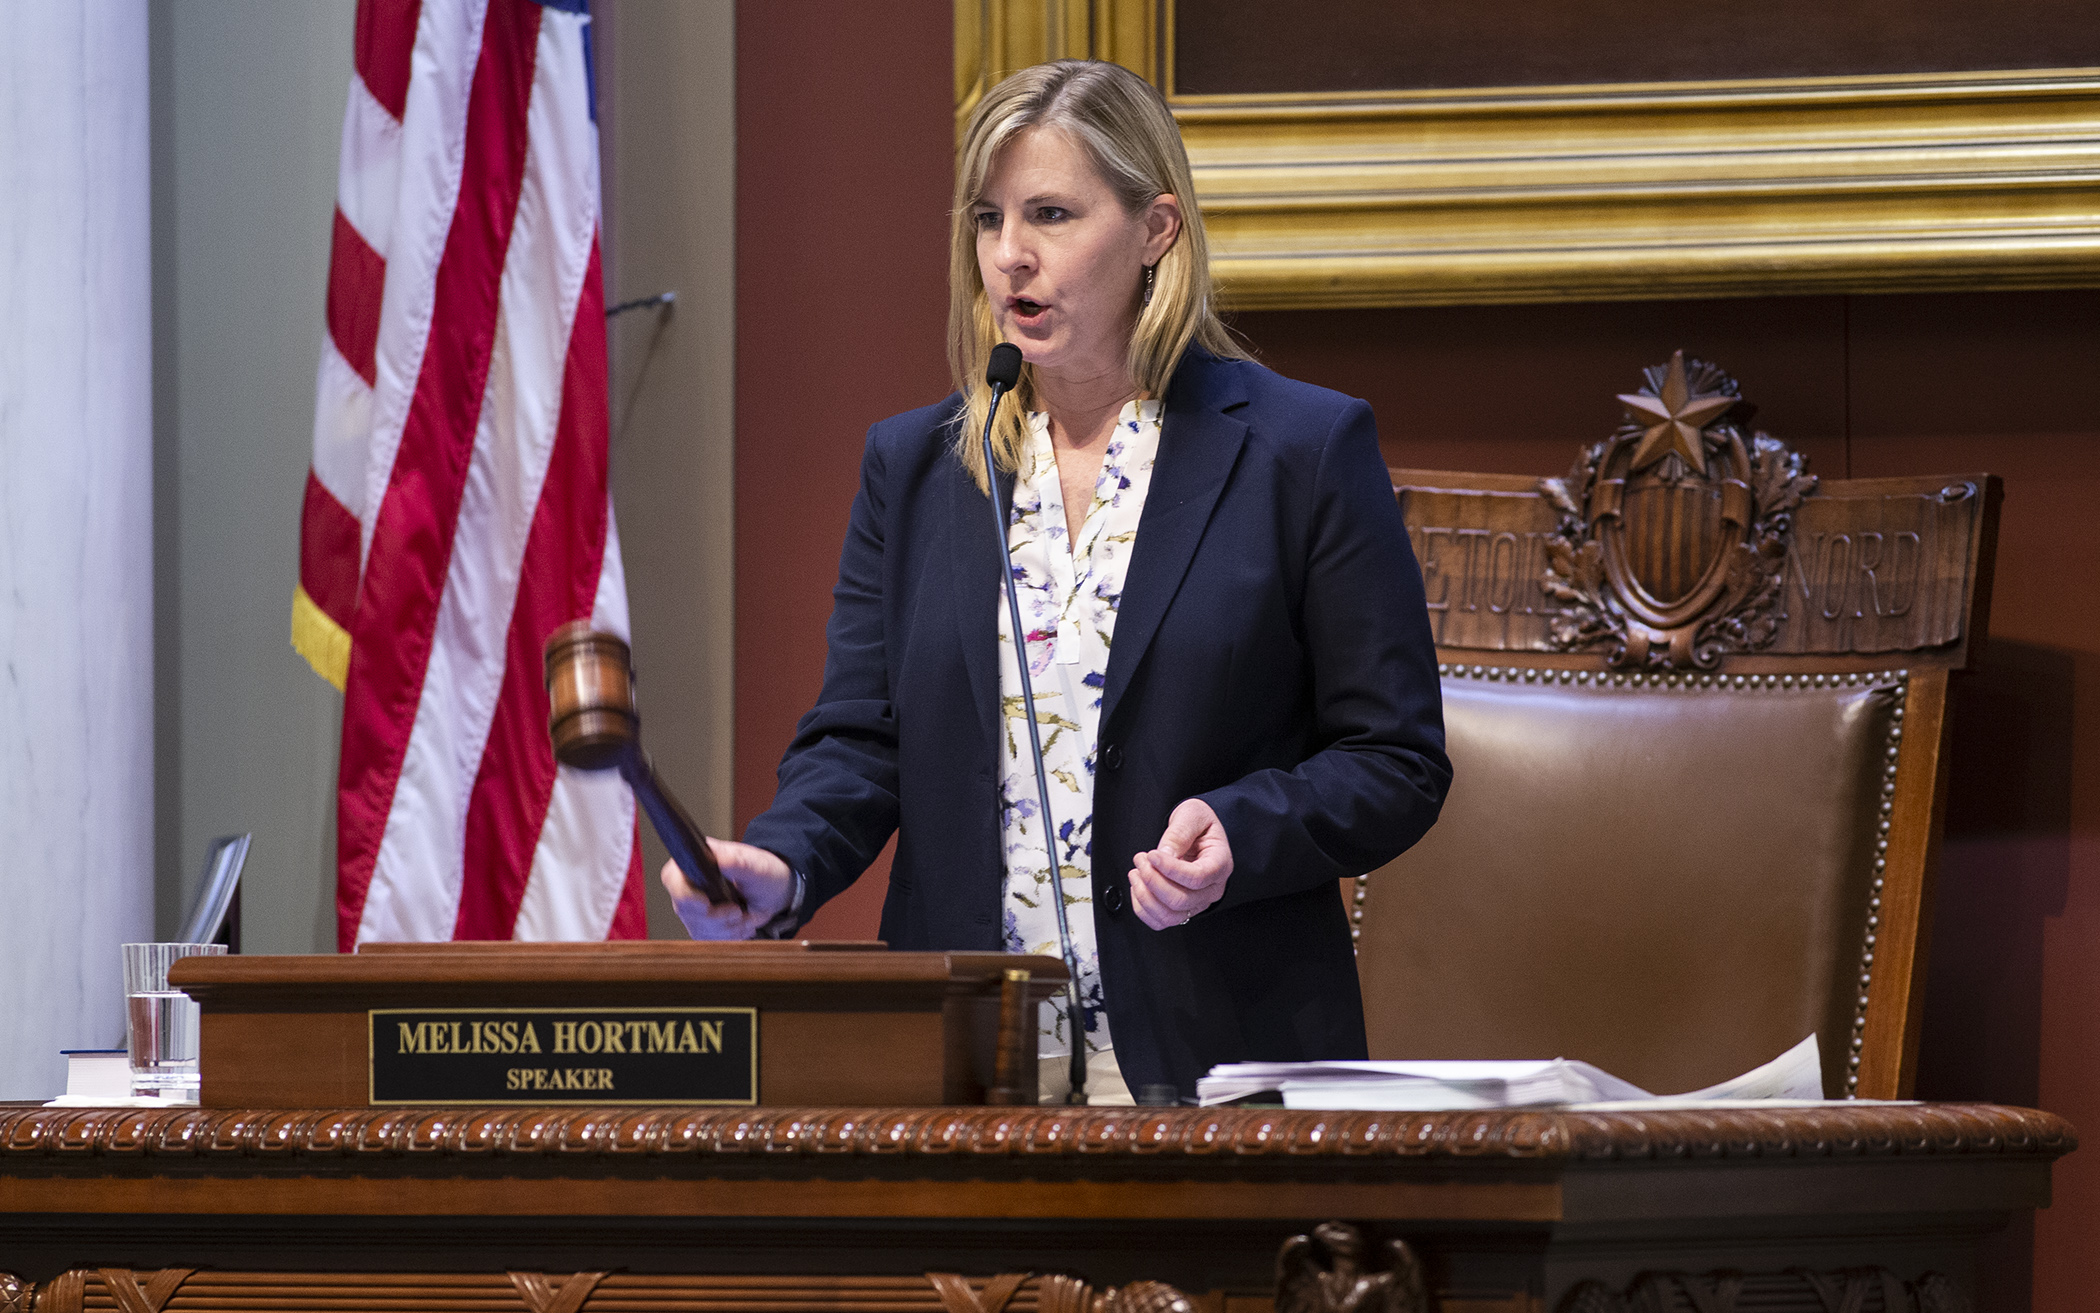 House Speaker Melissa Hortman gavels to a close the 2021 First Special Session in the early morning hours July 1. Lawmakers return for the 2022 session Jan. 31 to a projected $7.7 billion budget surplus. (House Photography file photo)